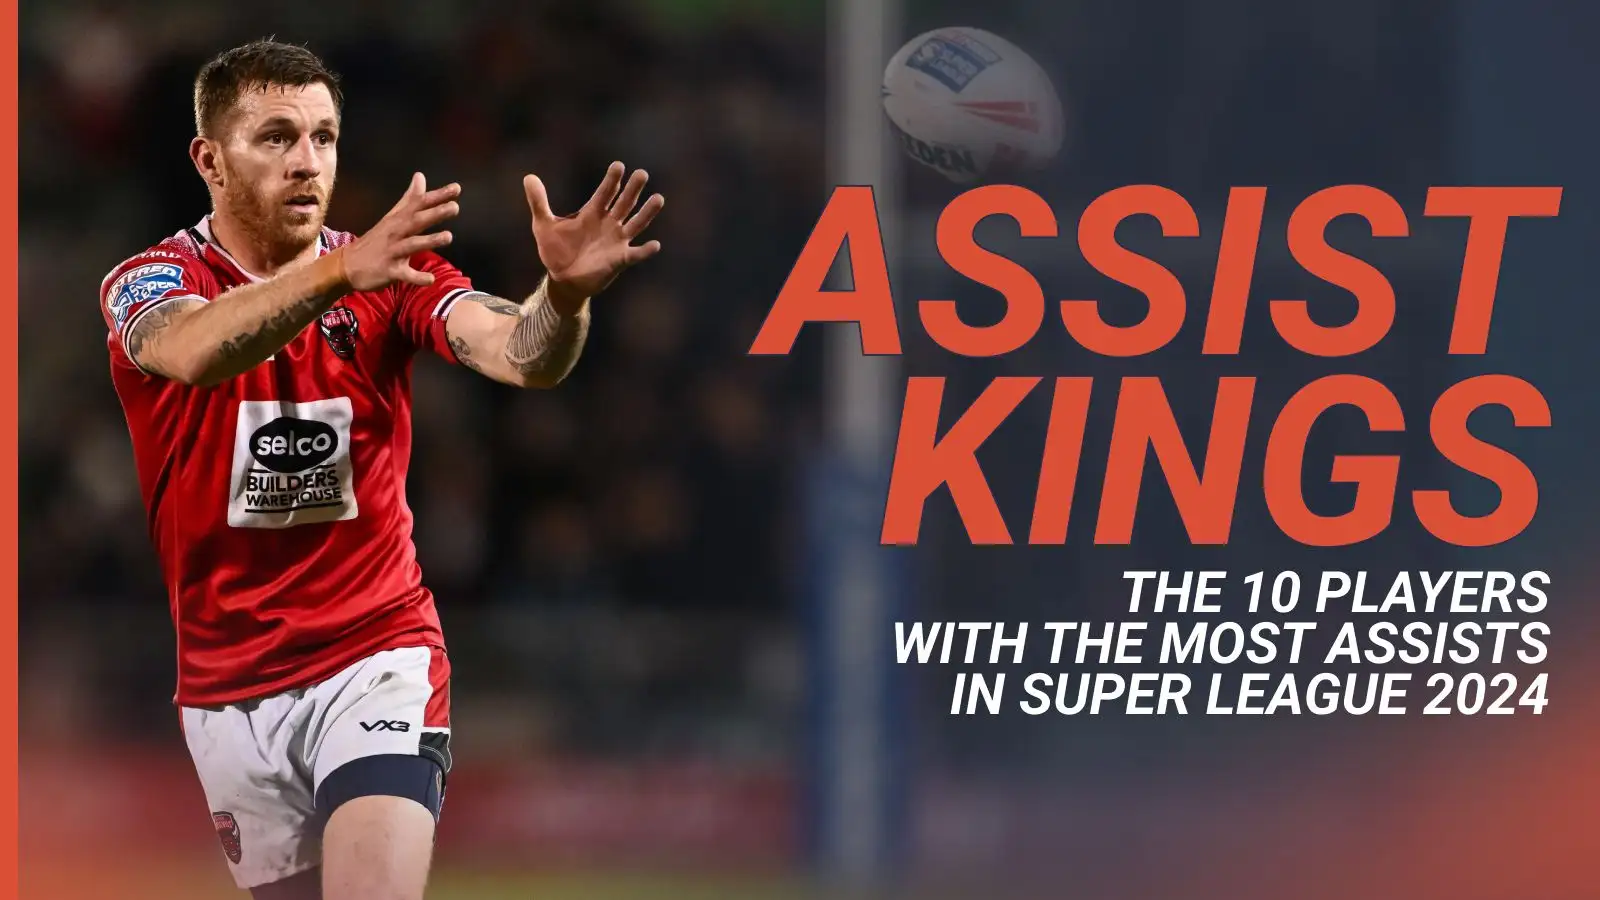 The 10 players with the most assists in Super League in 2024